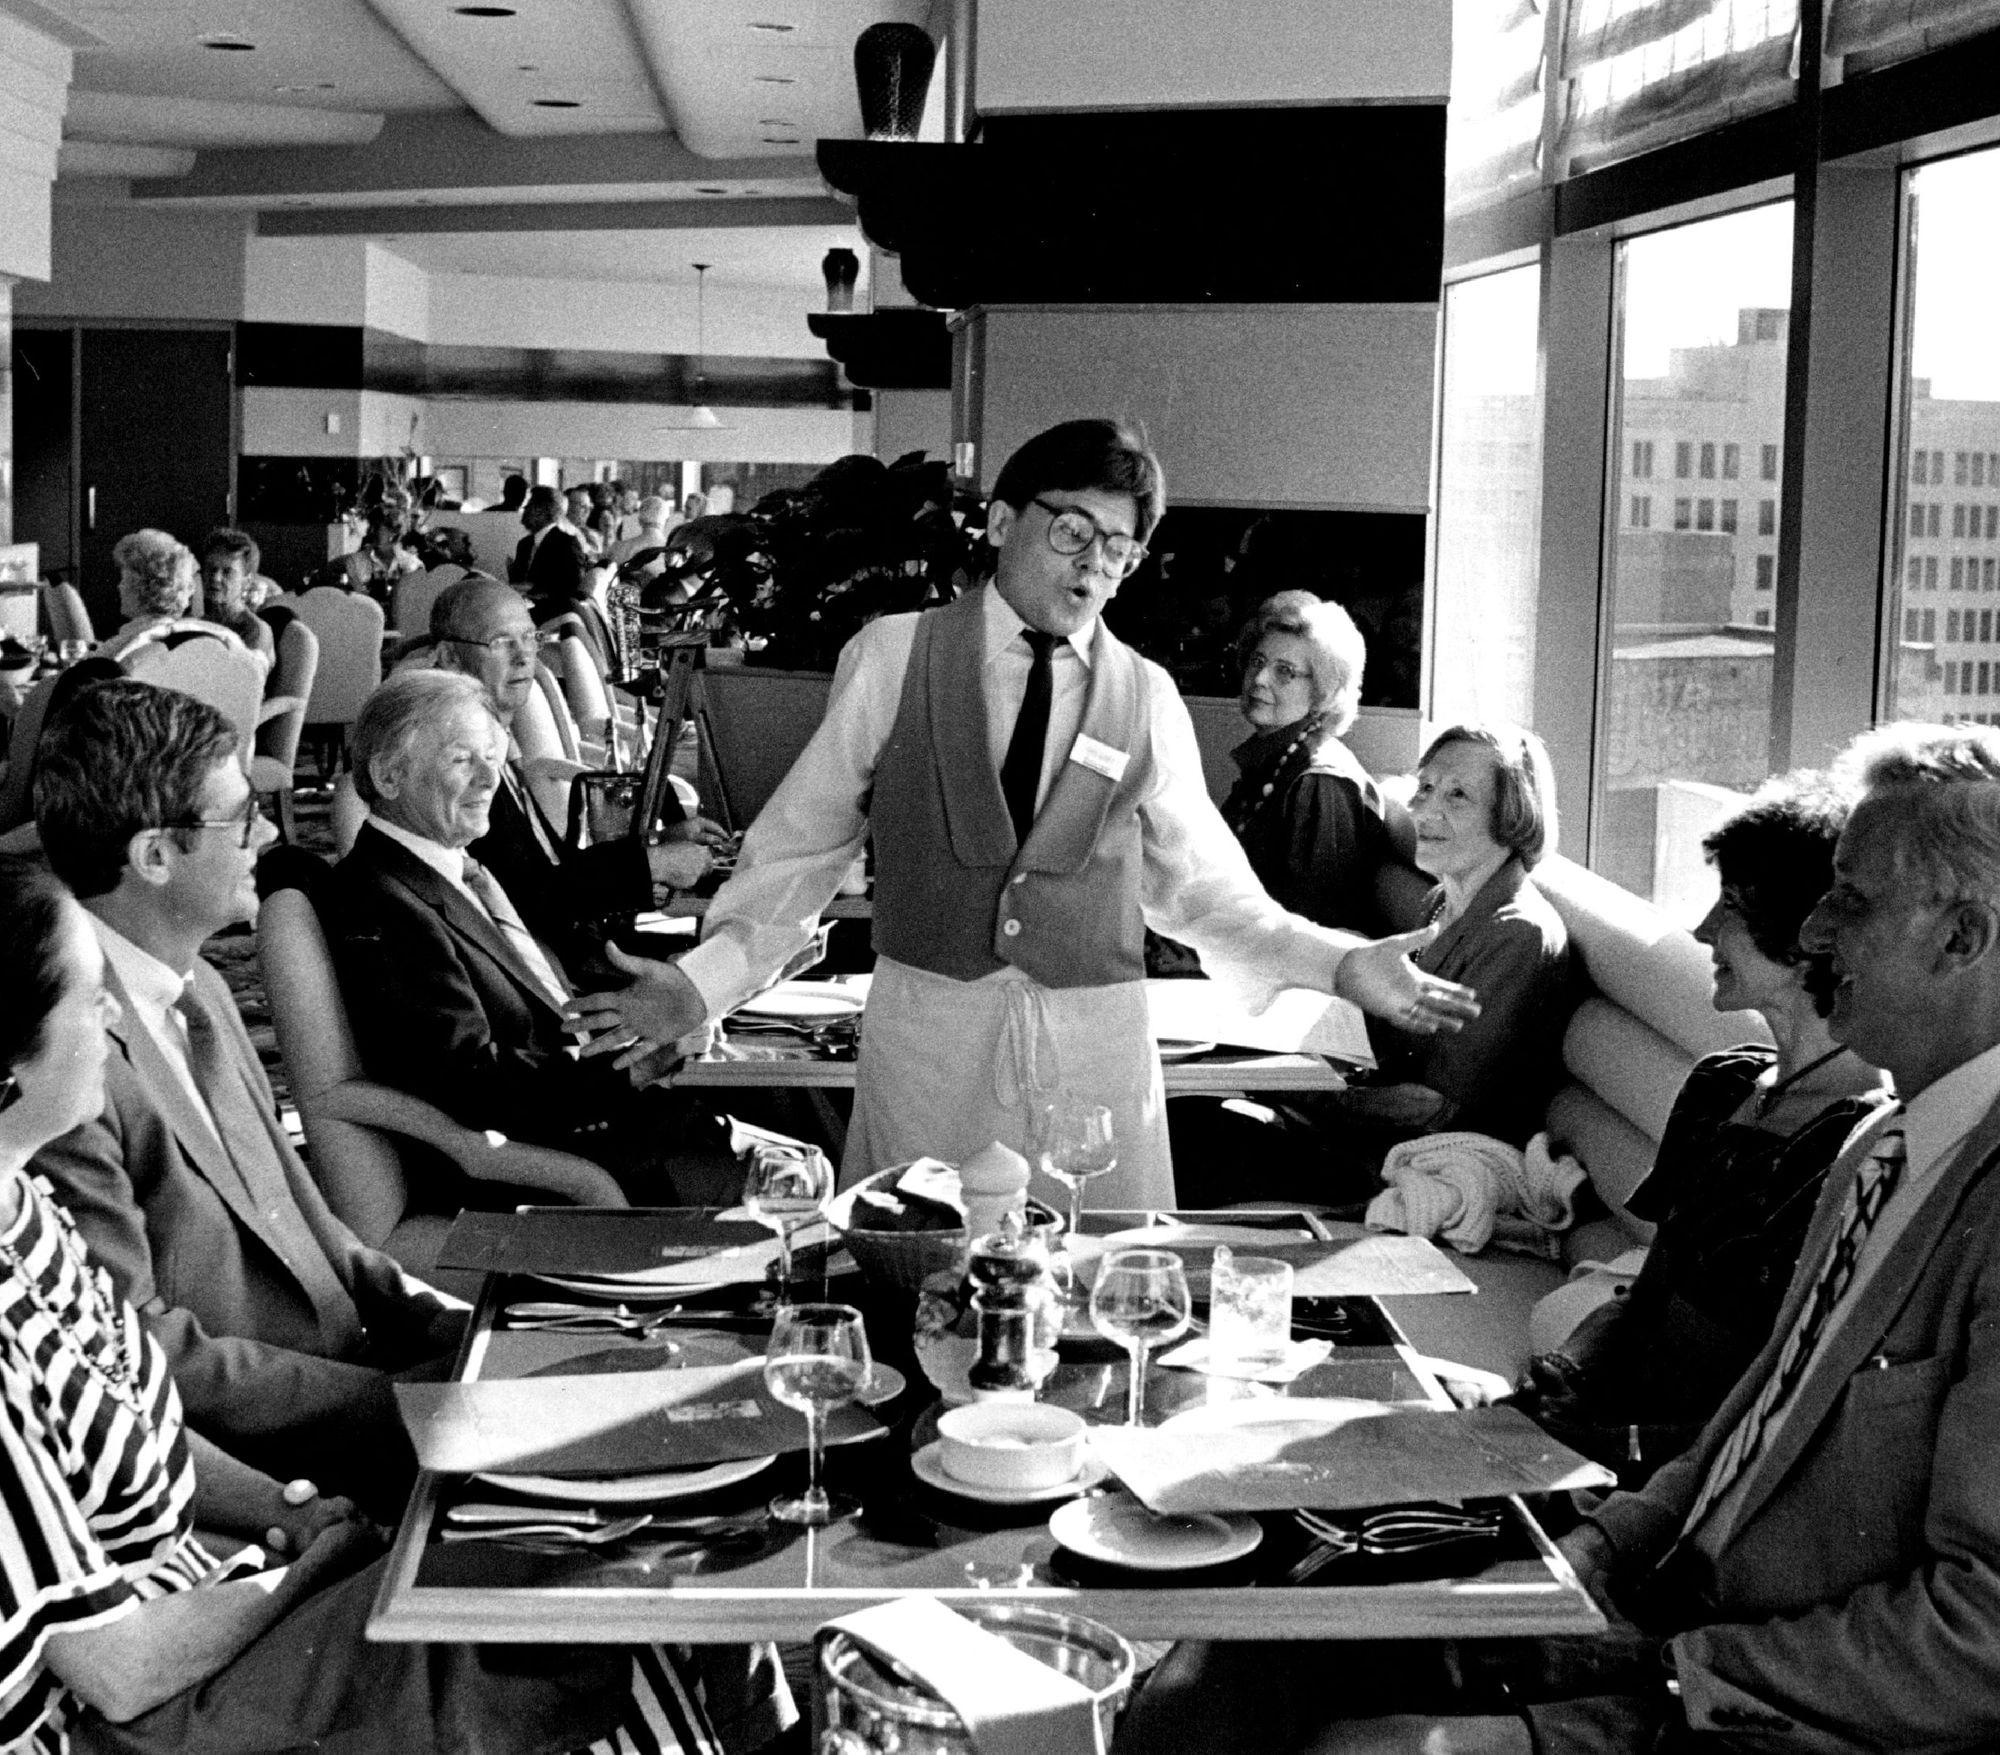 Gustino’s, the dinner only Italian restaurant in the Amfac Hotel, 30 S. 7th St. (349-4000), offers views of the city at sunset, plus food, music and charm. June 25, 1984 David Brewster, Minneapolis Star Tribune